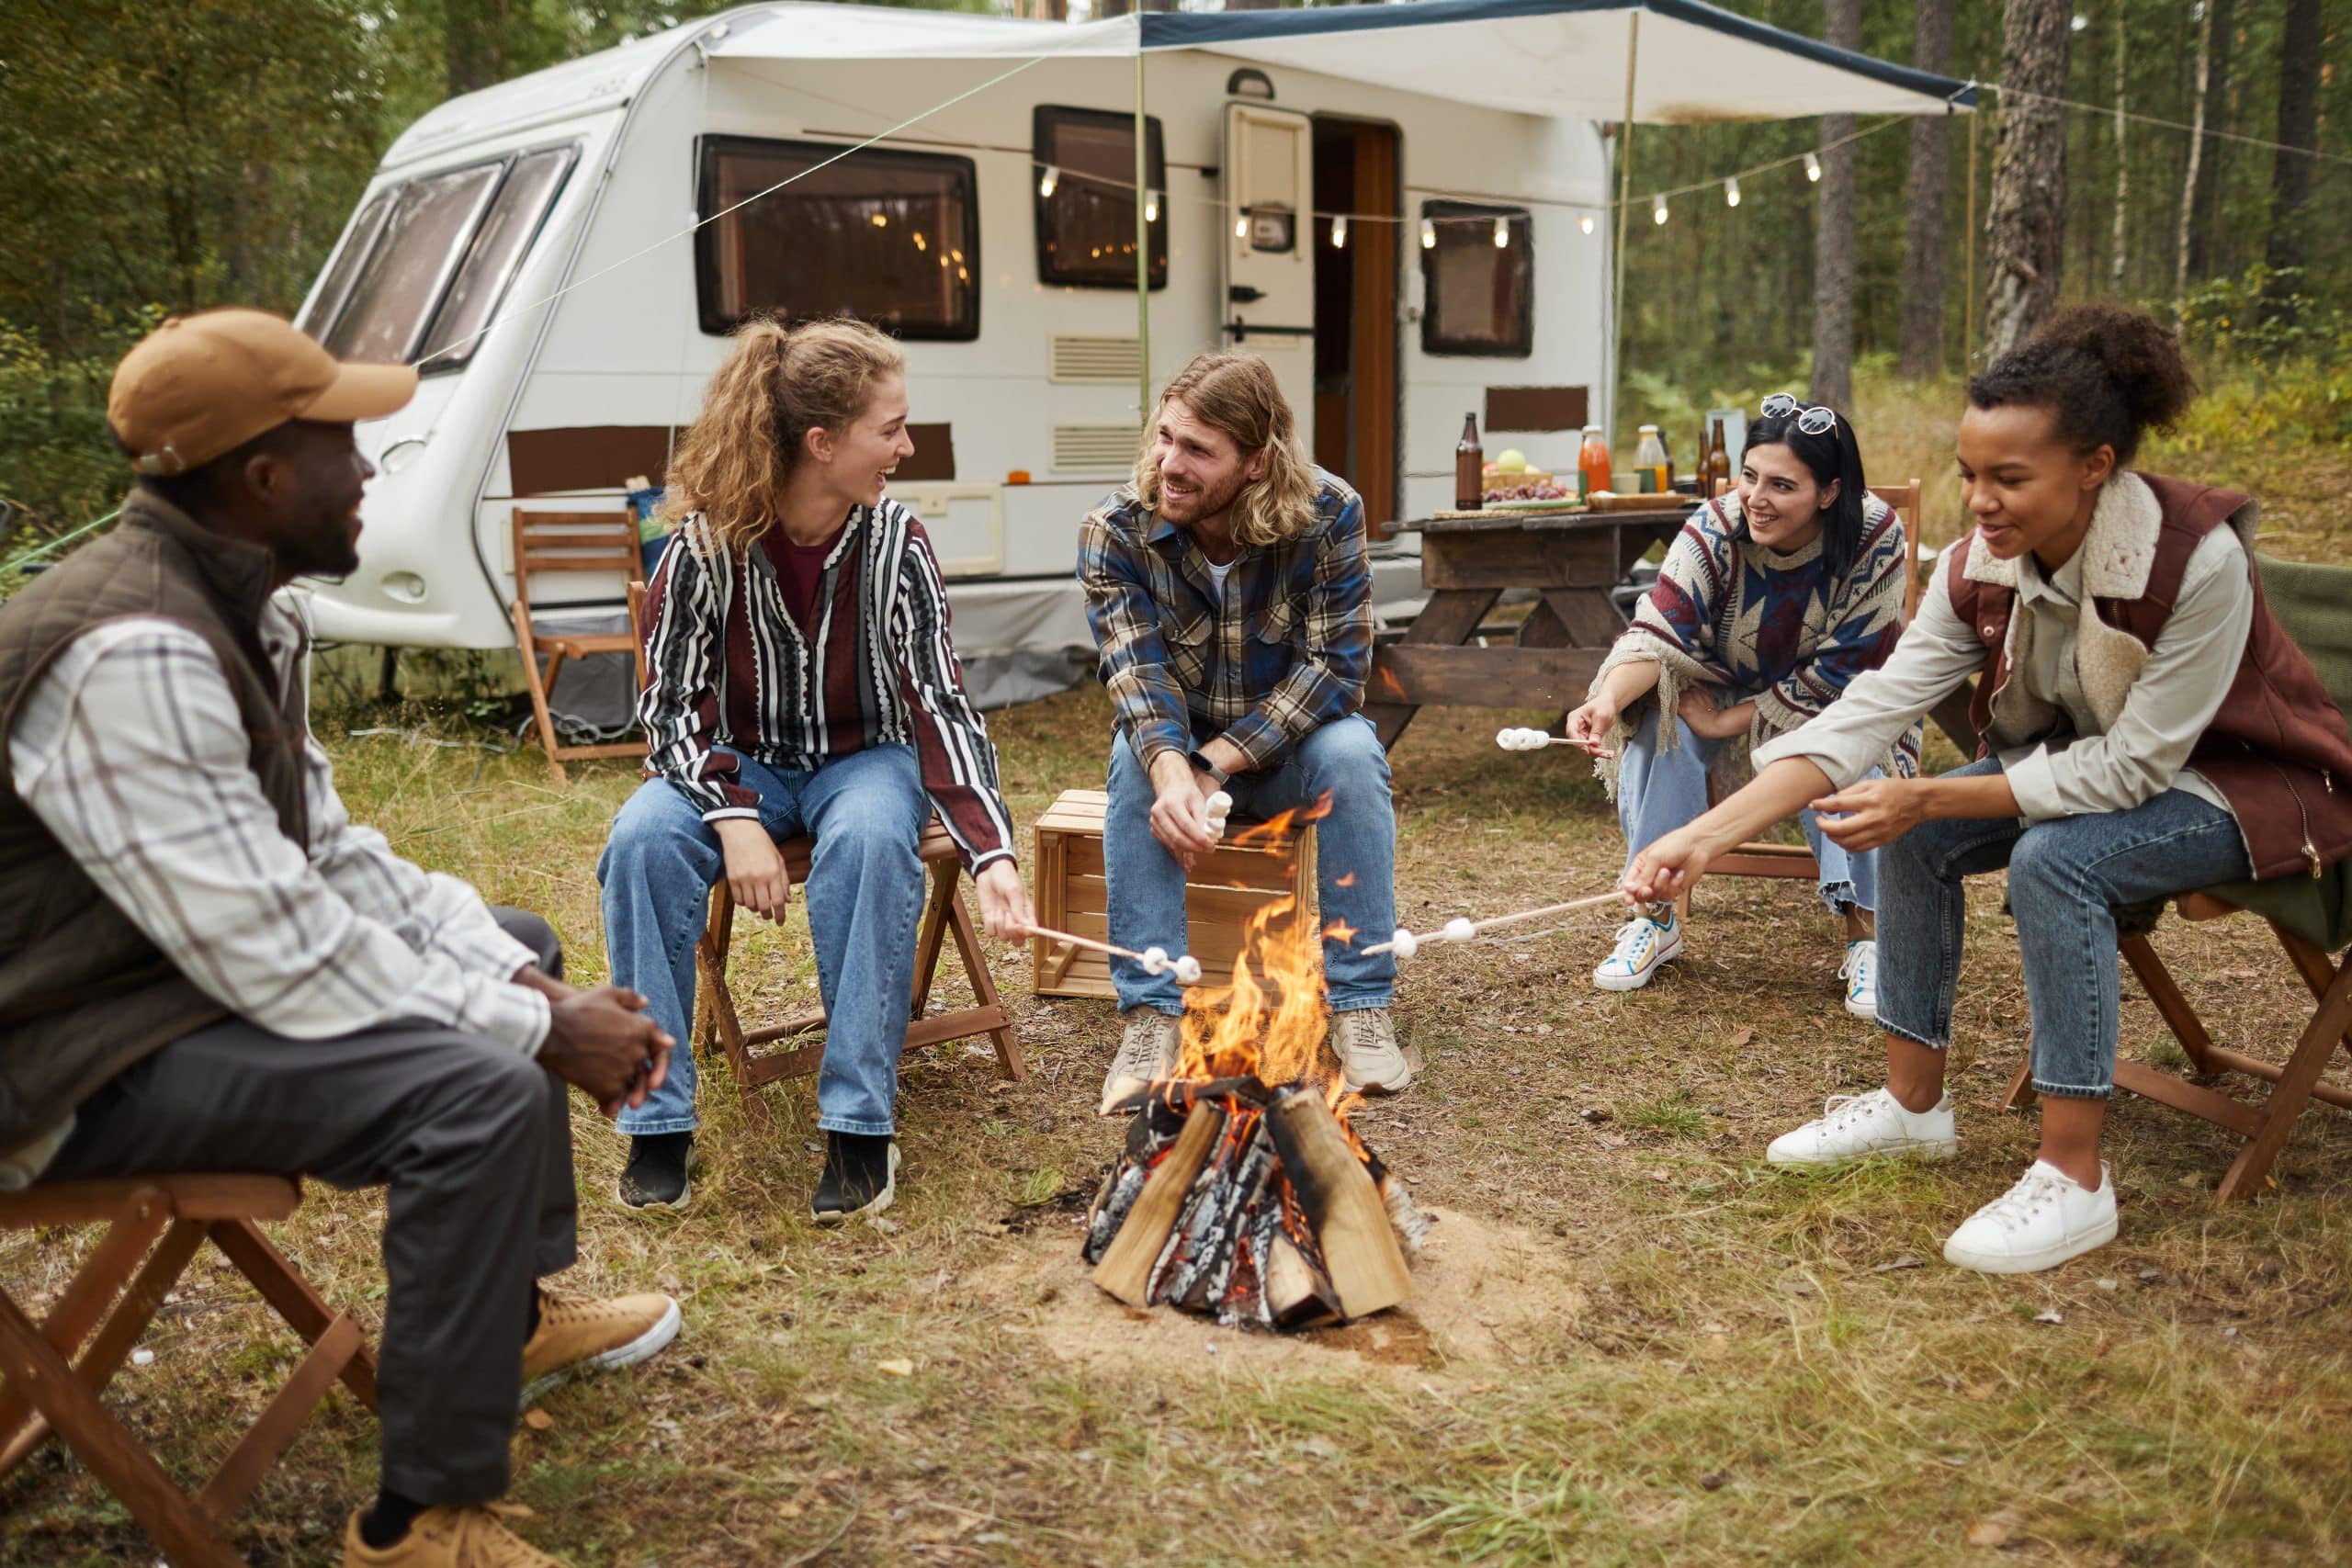 Diverse group of young people roasting marshmallows while enjoying camping with friends in forest, copy space